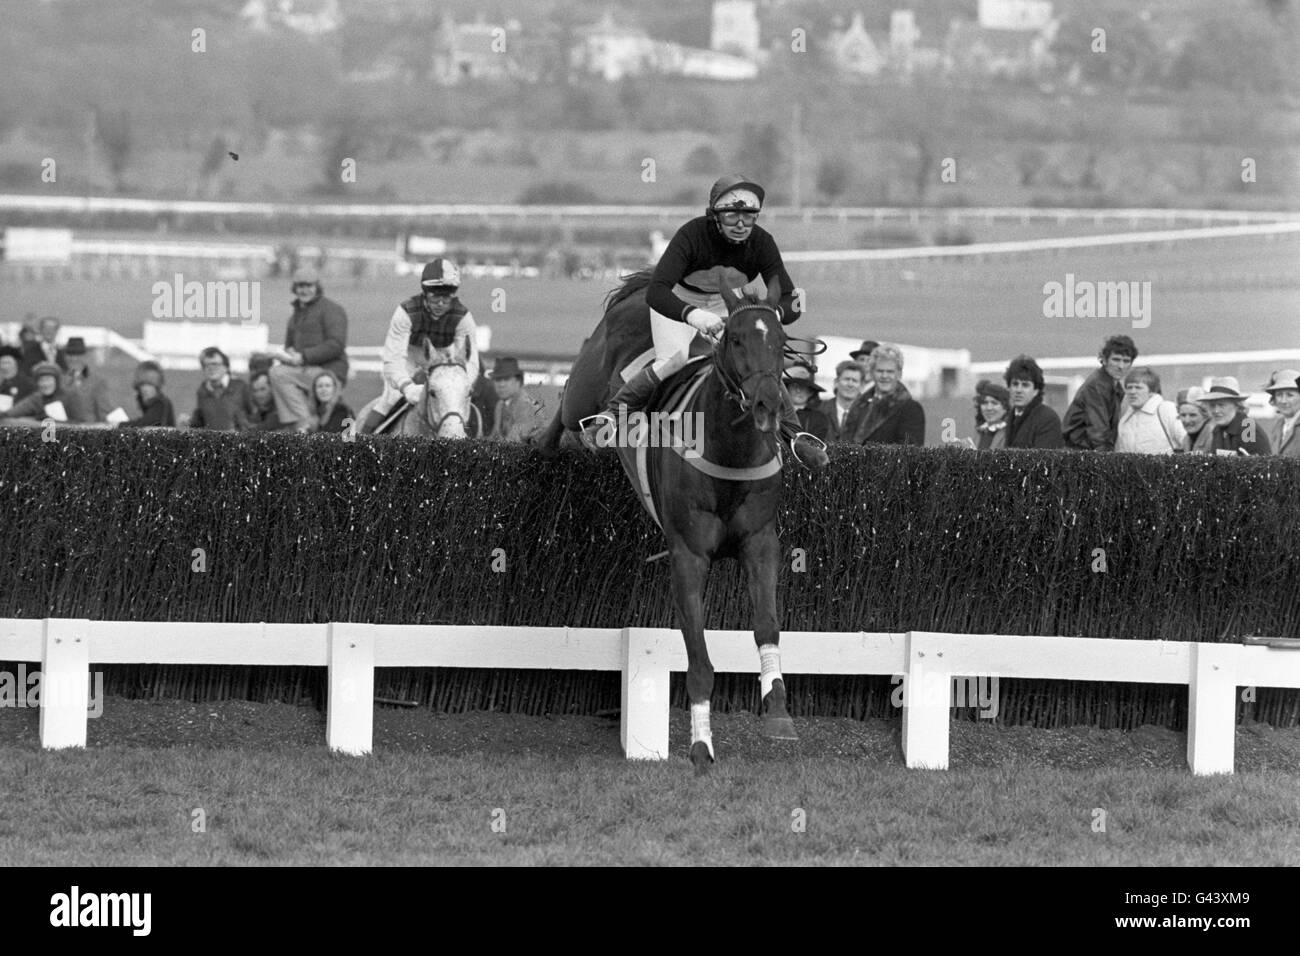 The first female jockey to win a race at Cheltenham, Caroline Beasley who won the Christie's Foxhunter Chase on 'Eliogarty'. Stock Photo